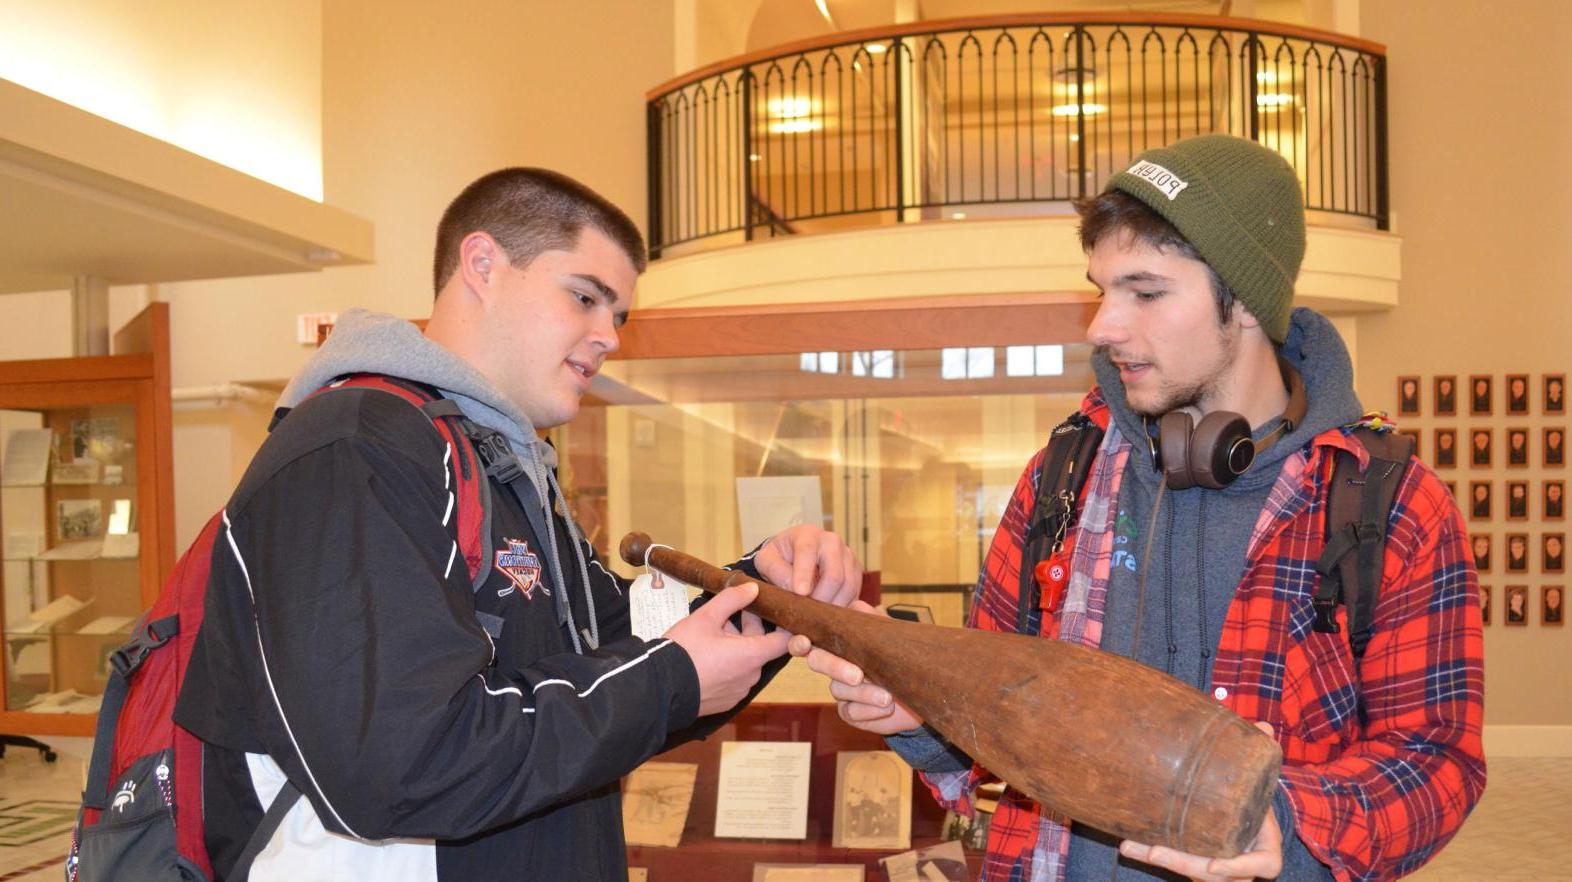 Two students examine a historic piece of pottery in the Springfield College experience.